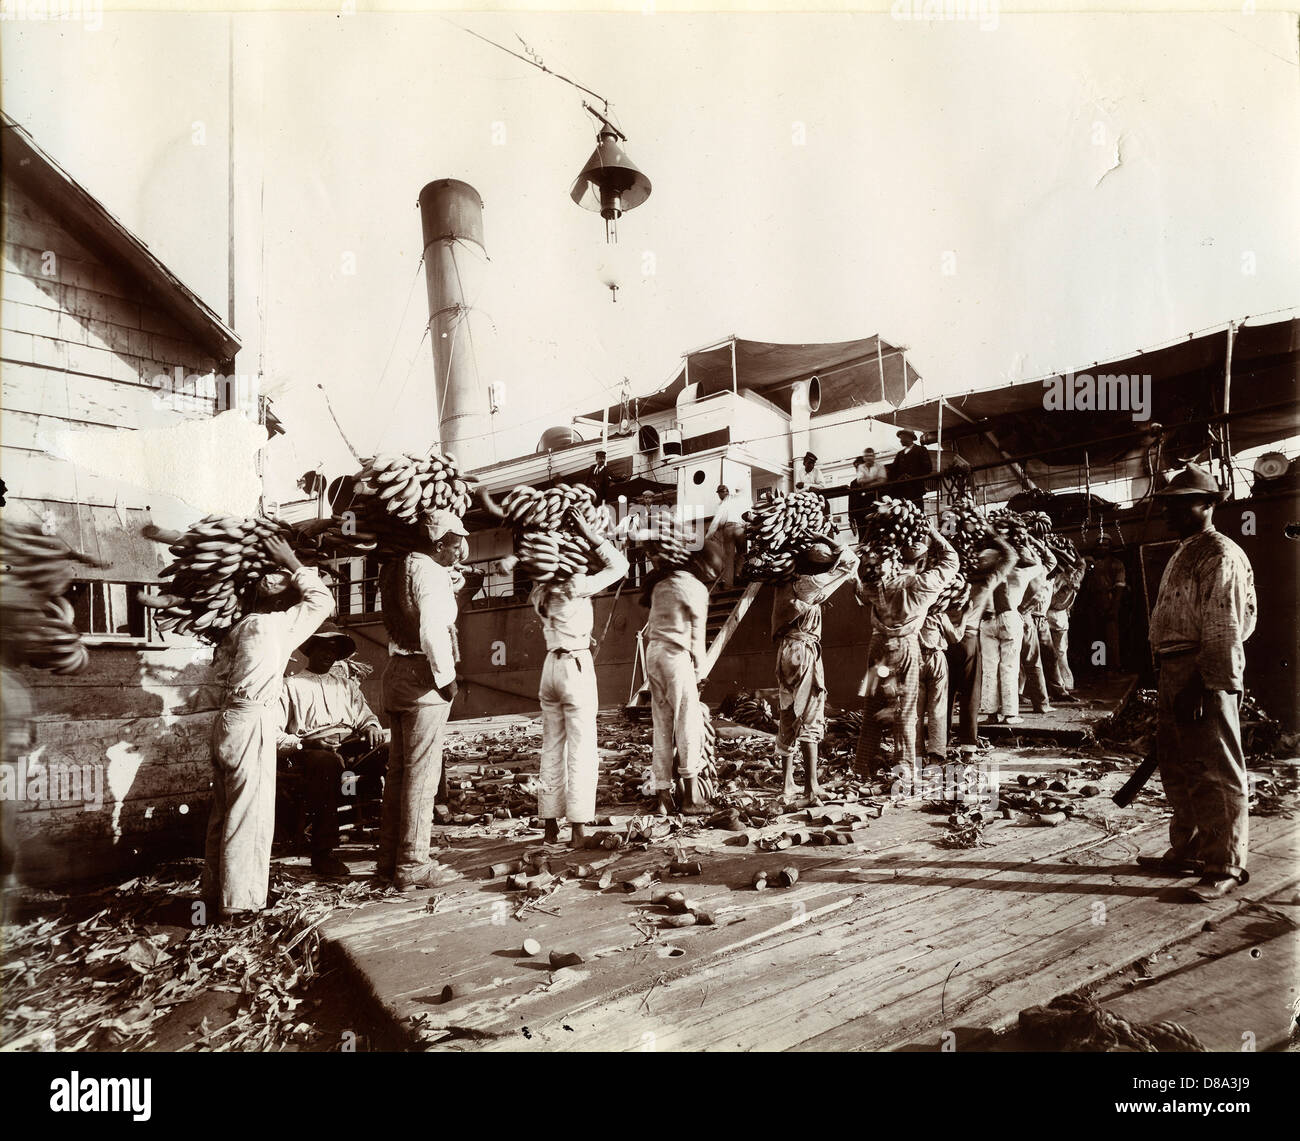 Loading Bananas, Port Antonio, Jamaica, ca 1890, by A. Duperly & Sons Stock Photo